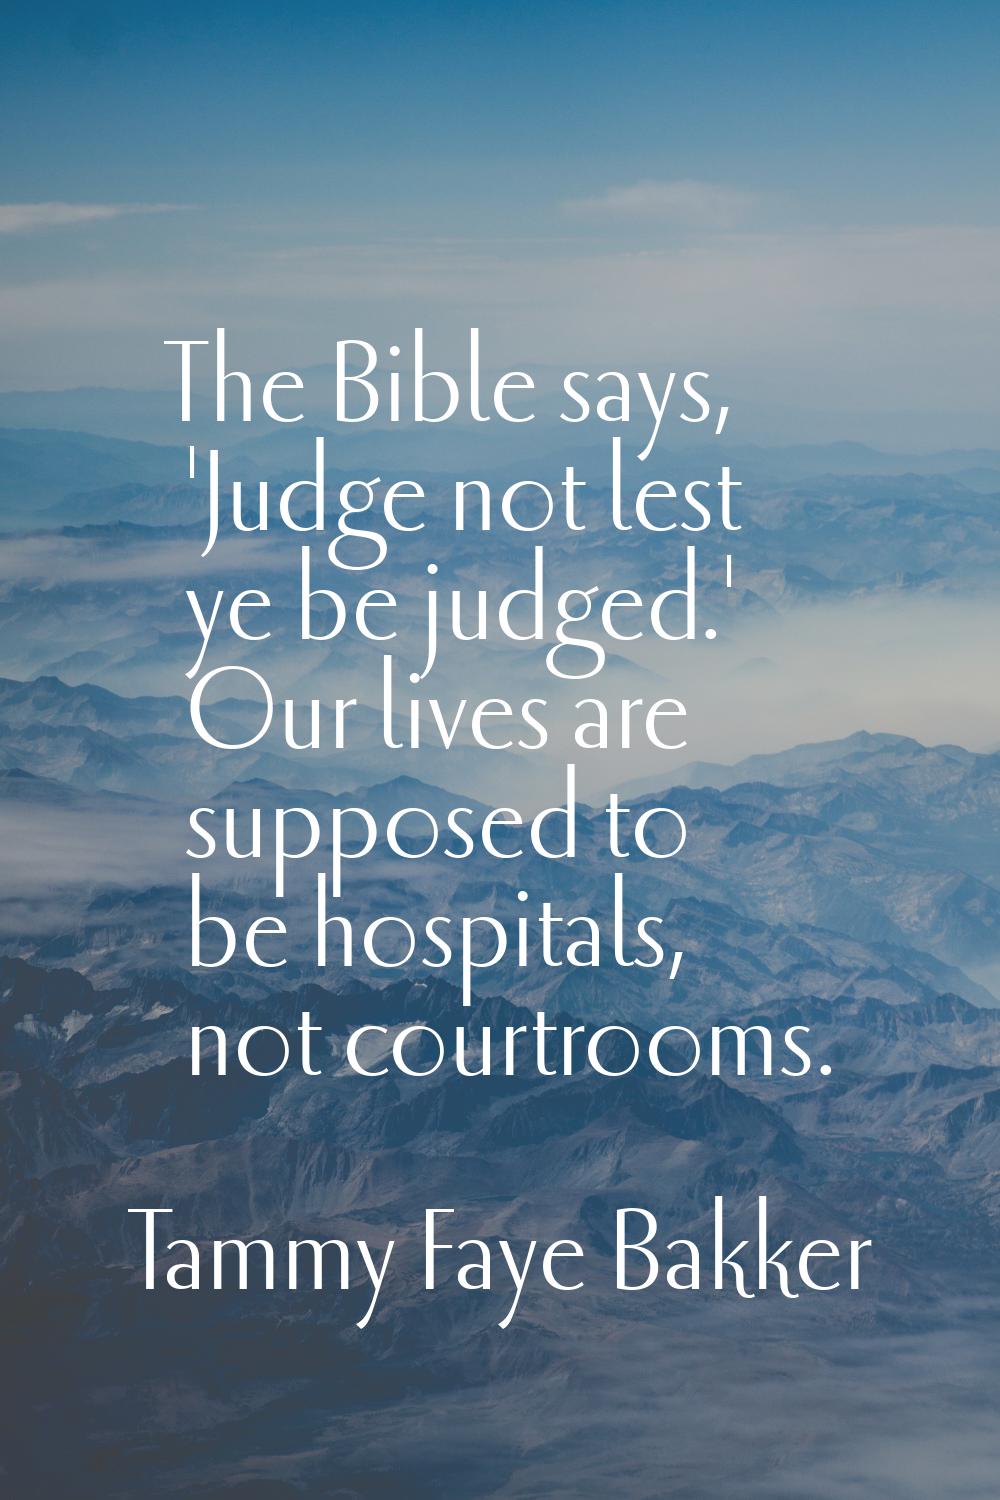 The Bible says, 'Judge not lest ye be judged.' Our lives are supposed to be hospitals, not courtroo